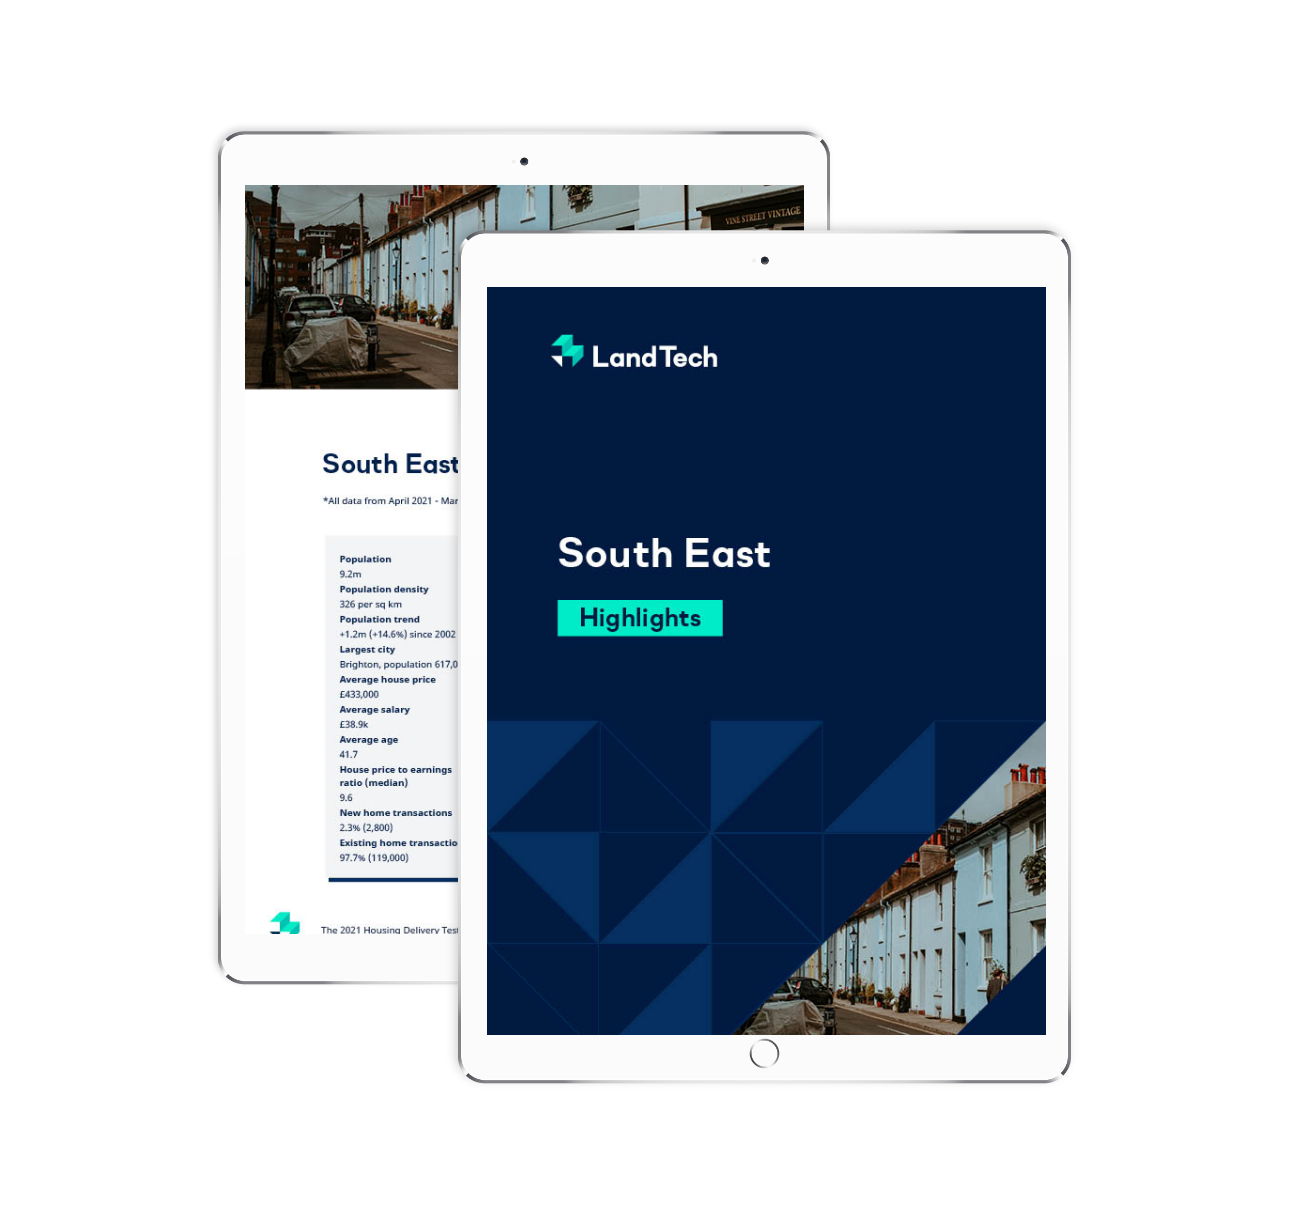 South East_Highlights